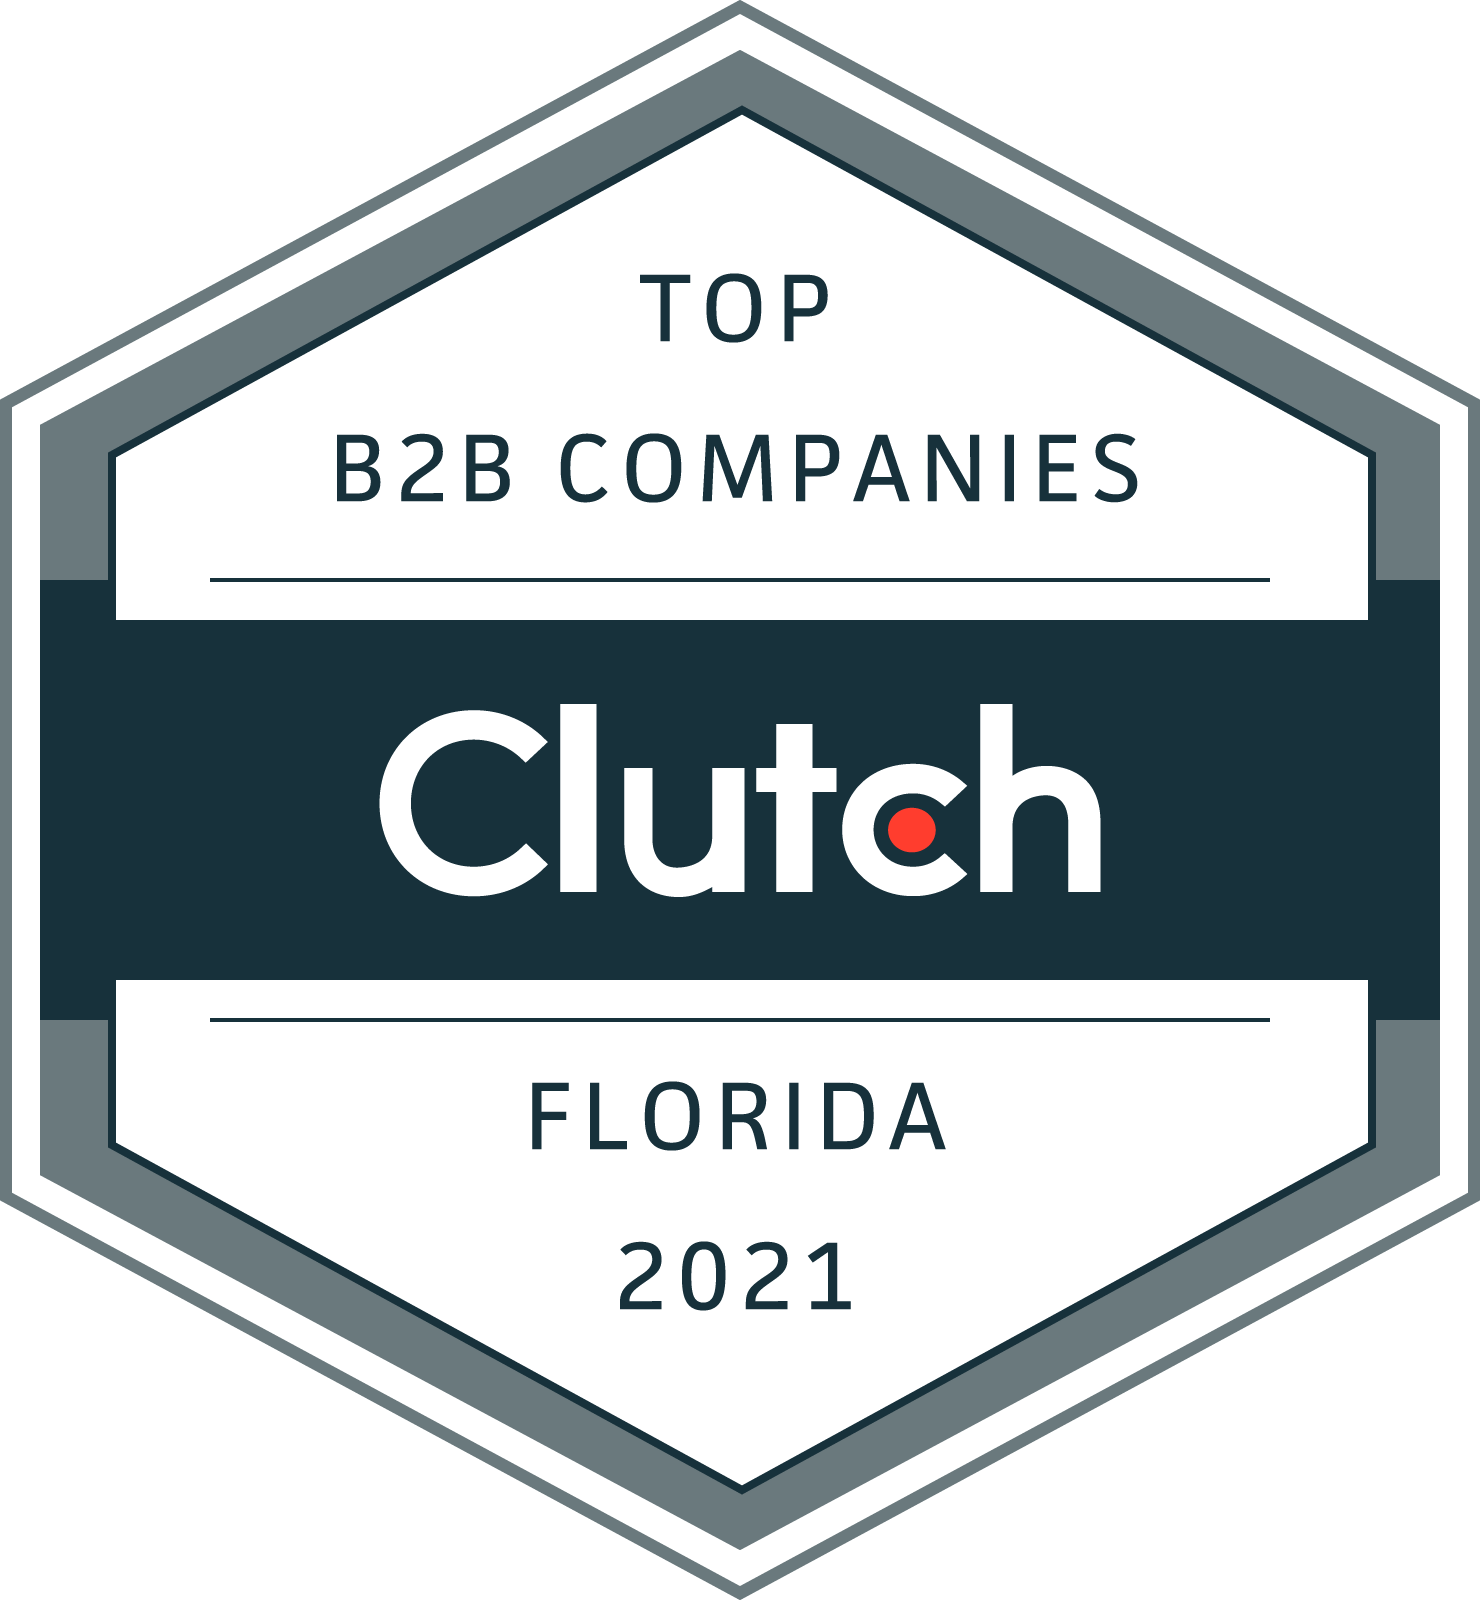 Clutch badge for Florida's top B2B firms